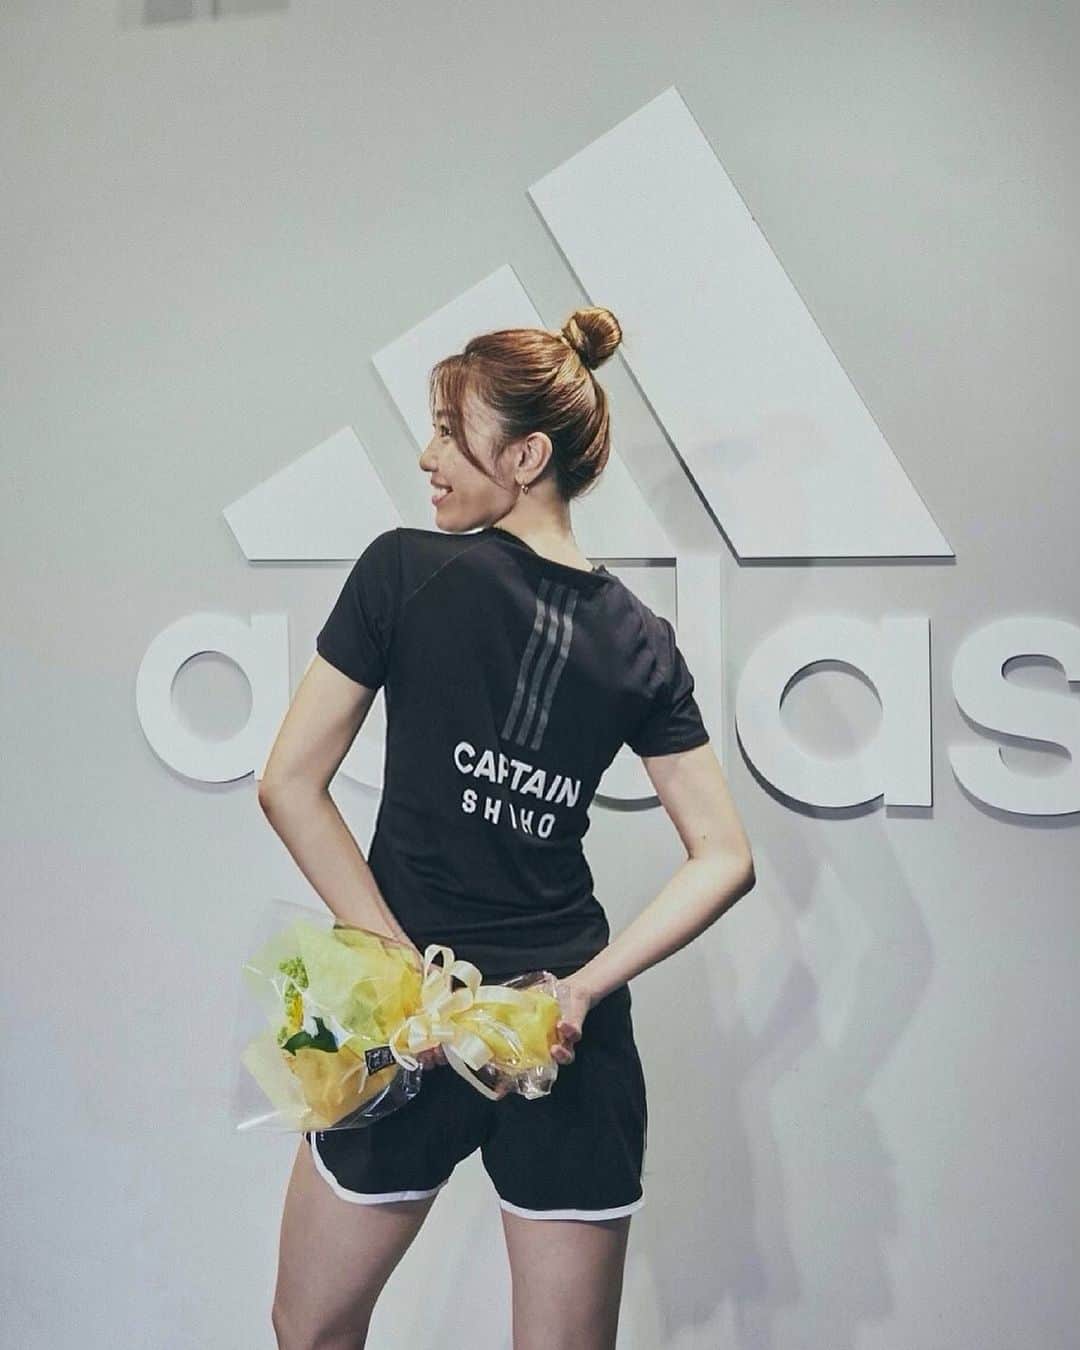 岩崎志保さんのインスタグラム写真 - (岩崎志保Instagram)「The LAST massage as adidas Runners Tokyo CAPTAIN.🌏🏃🏼‍♀️ English follows japanease.  2016年9月にローンチした【adidas Runners Tokyo】 それから約5年務めさせていただいたキャプテンを卒業することになりました！  5年ってすごいことだよね 自分がやりたいことがまだ定まりきっていなかった23歳の時からグローバルブランドさんとお仕事をさせていただき、その中で  世界中に友達ができたこと いろんな価値観を知れたこと 失敗も成功も経験できたこと  この5年でARを通して得たものがたくさんある！ ARという存在は今の私を形成している大きな1つとなりました  adidasJapanのみなさん 全世界のadidasRunners Crew  本当にありがとうございました❤️‍🔥 これからも大好きで大切な場所には変わりないし、いつかまた形を変えて携われたらいいなと思っていますのでよろしくお願いします！  ＝＝＝＝＝＝＝＝＝＝＝＝＝＝＝＝＝  Being with this team for about five years since the launch of AR Tokyo in 2016, and having the opportunity to meet adidas Runners Crew from around the world, being connected with you all has had a huge impact on the way I see the world. There’s no way I would be the person I am today if I hadn’t have met you all. I’m so thankful to adidas Runners for giving me this amazing opportunity.  I may be graduating from my role as Captain, but regardless of that I would love it if we could all stay connected. I love this team. Thank you so much!  #adidasrunners #adidasrunnerstokyo @adidasrunners @adidastokyo」6月11日 18時18分 - shihoiwazaki